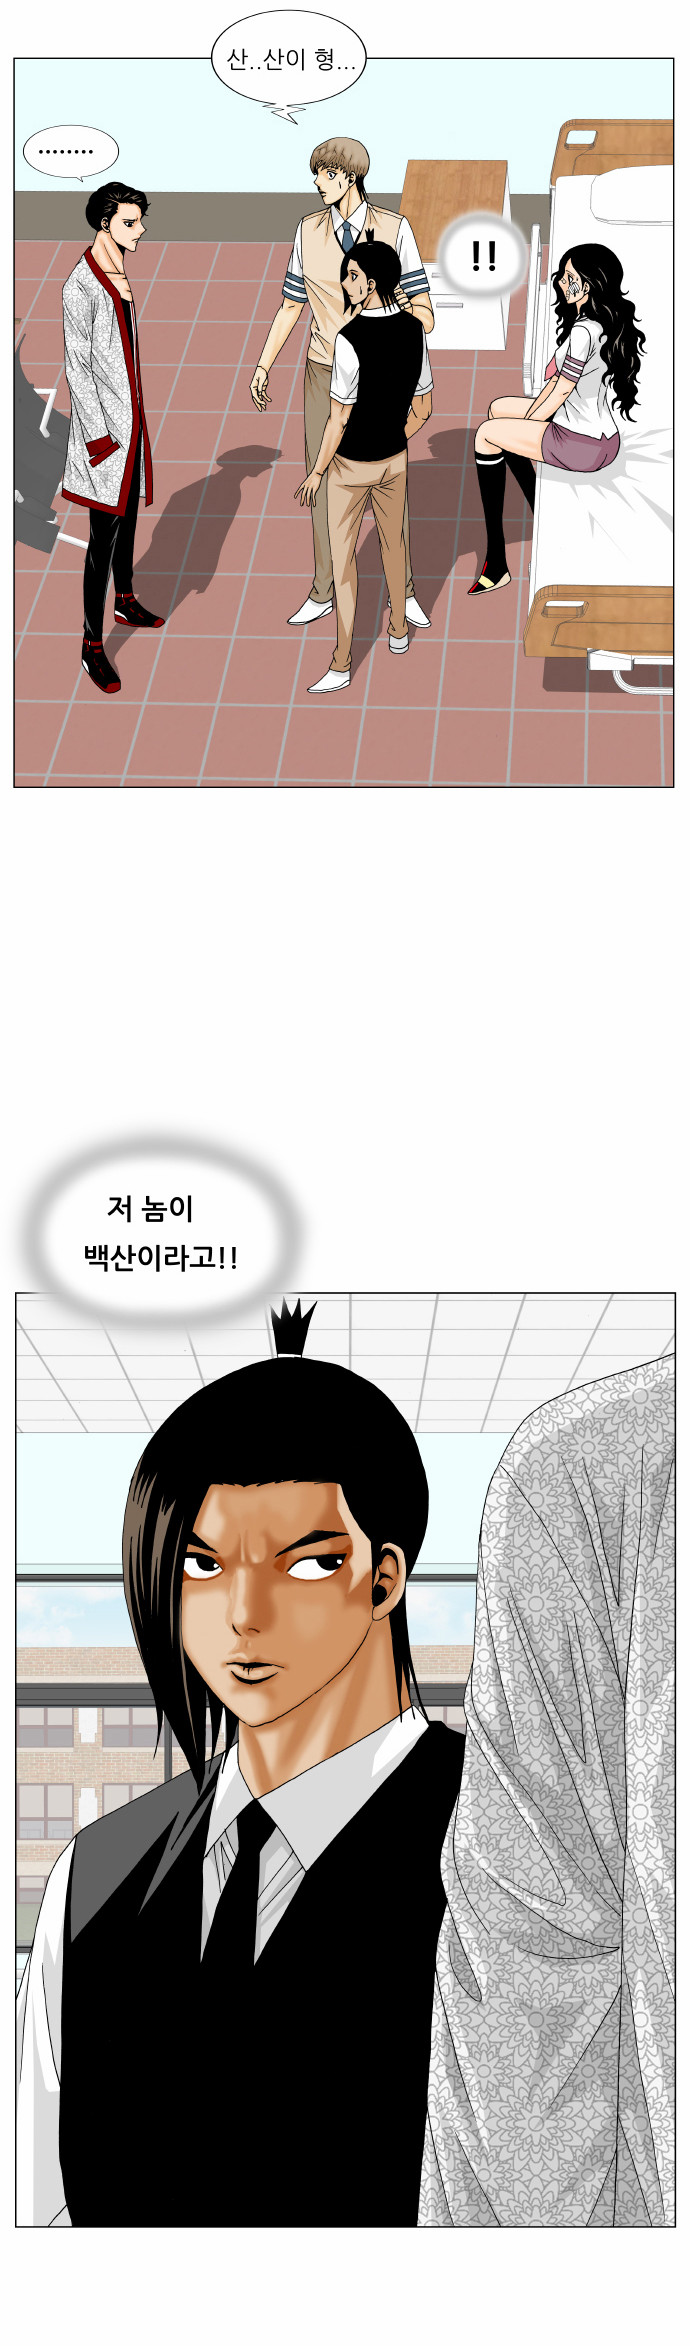 Ultimate Legend - Kang Hae Hyo - Chapter 167 - Page 2